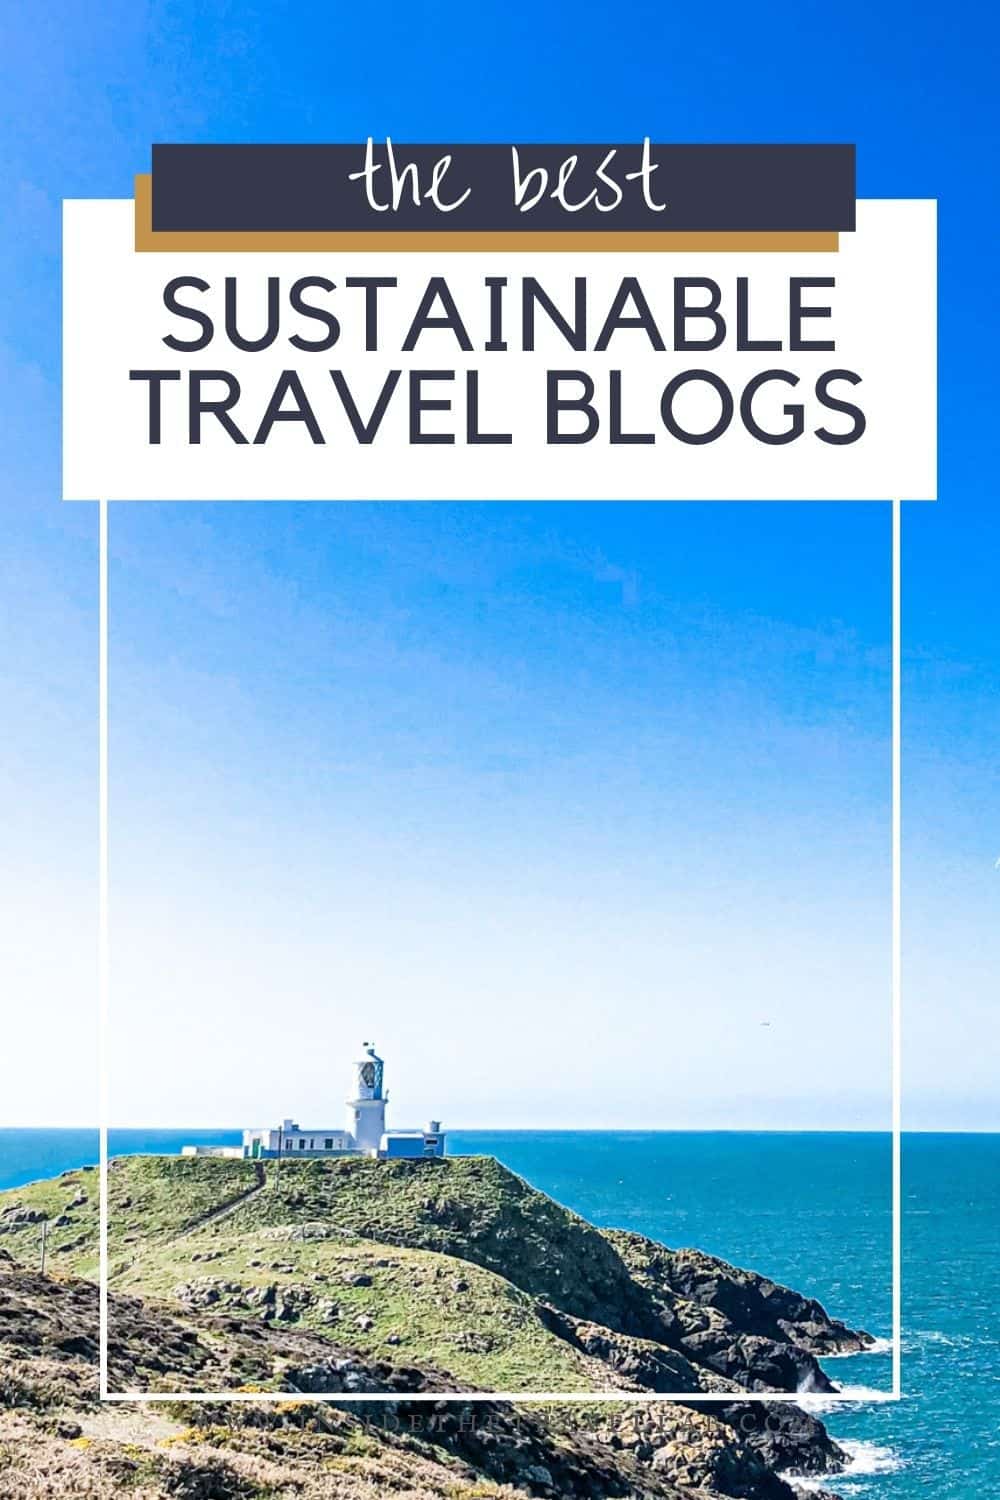 Lighthouse in Wales - Best eco friendly travel blogs cover